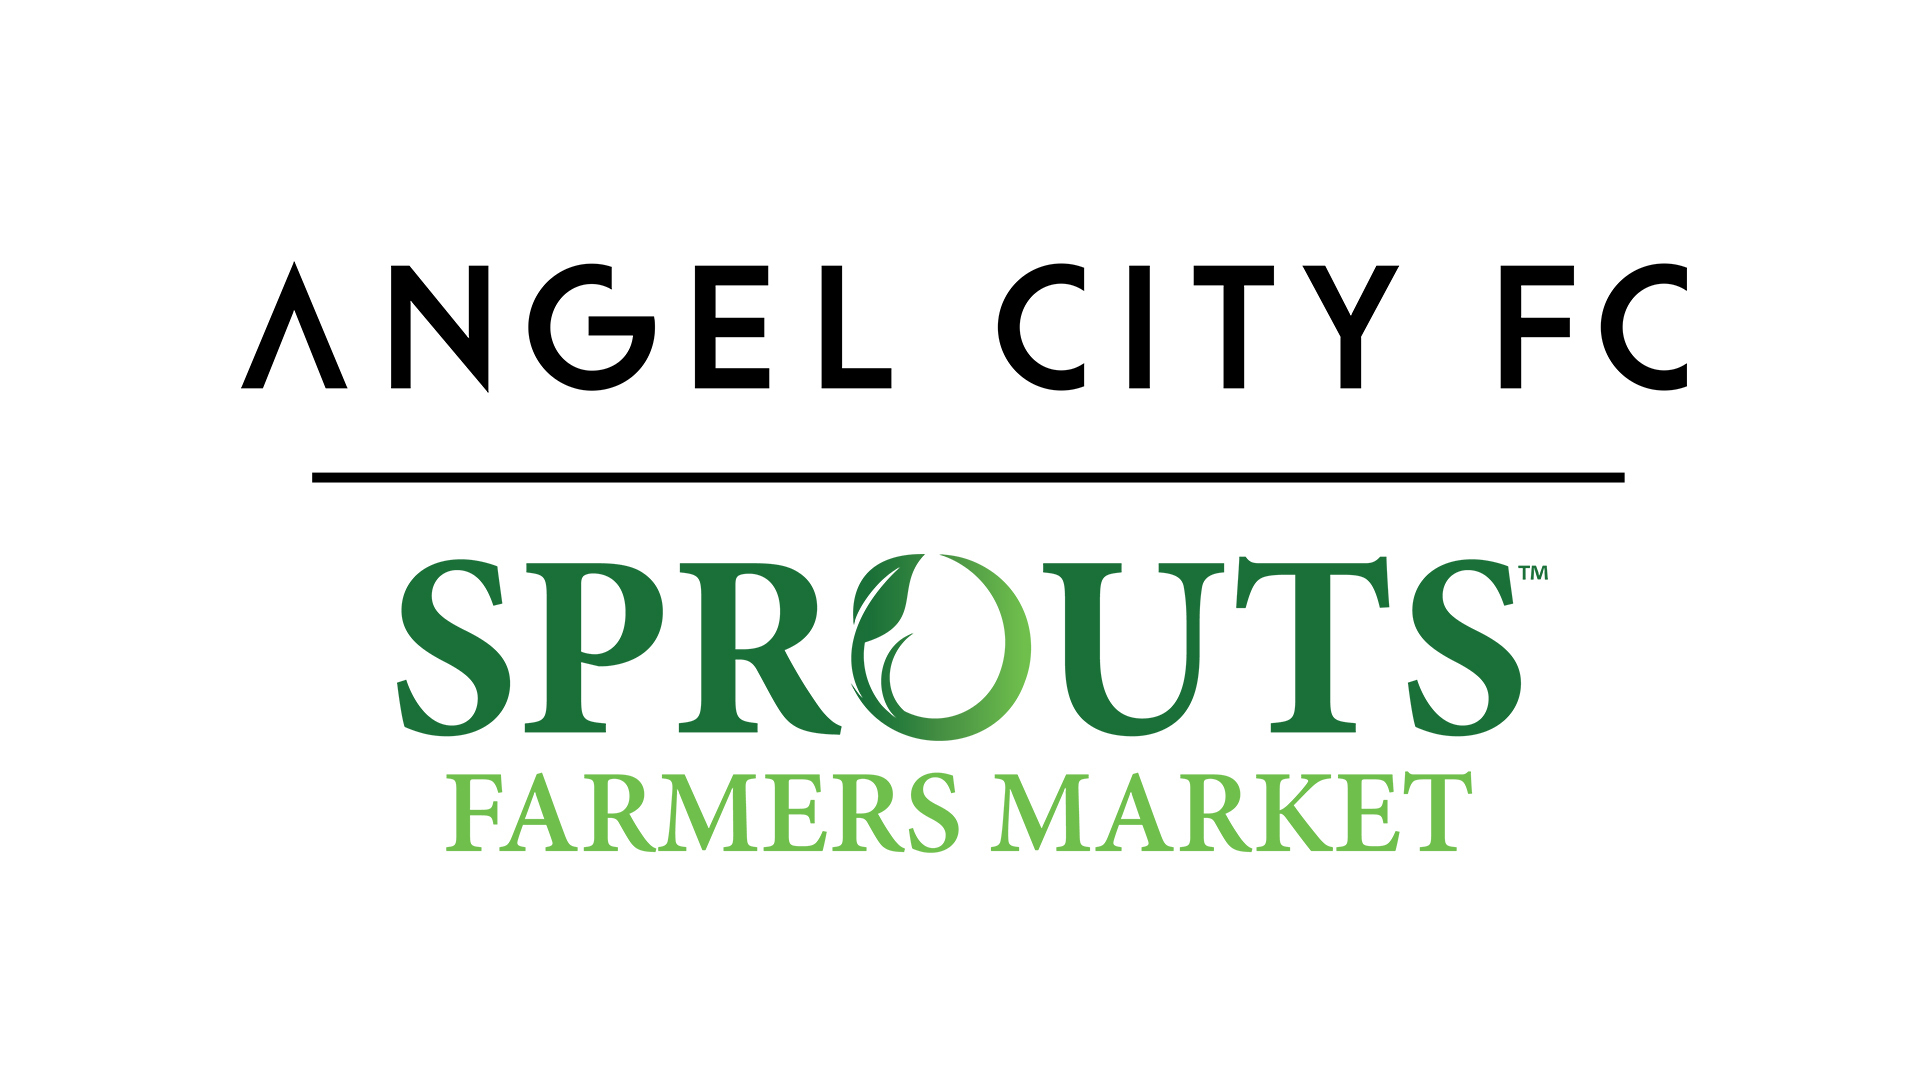 Angel City FC announced Sprouts Farmers Market as jersey sponsor.